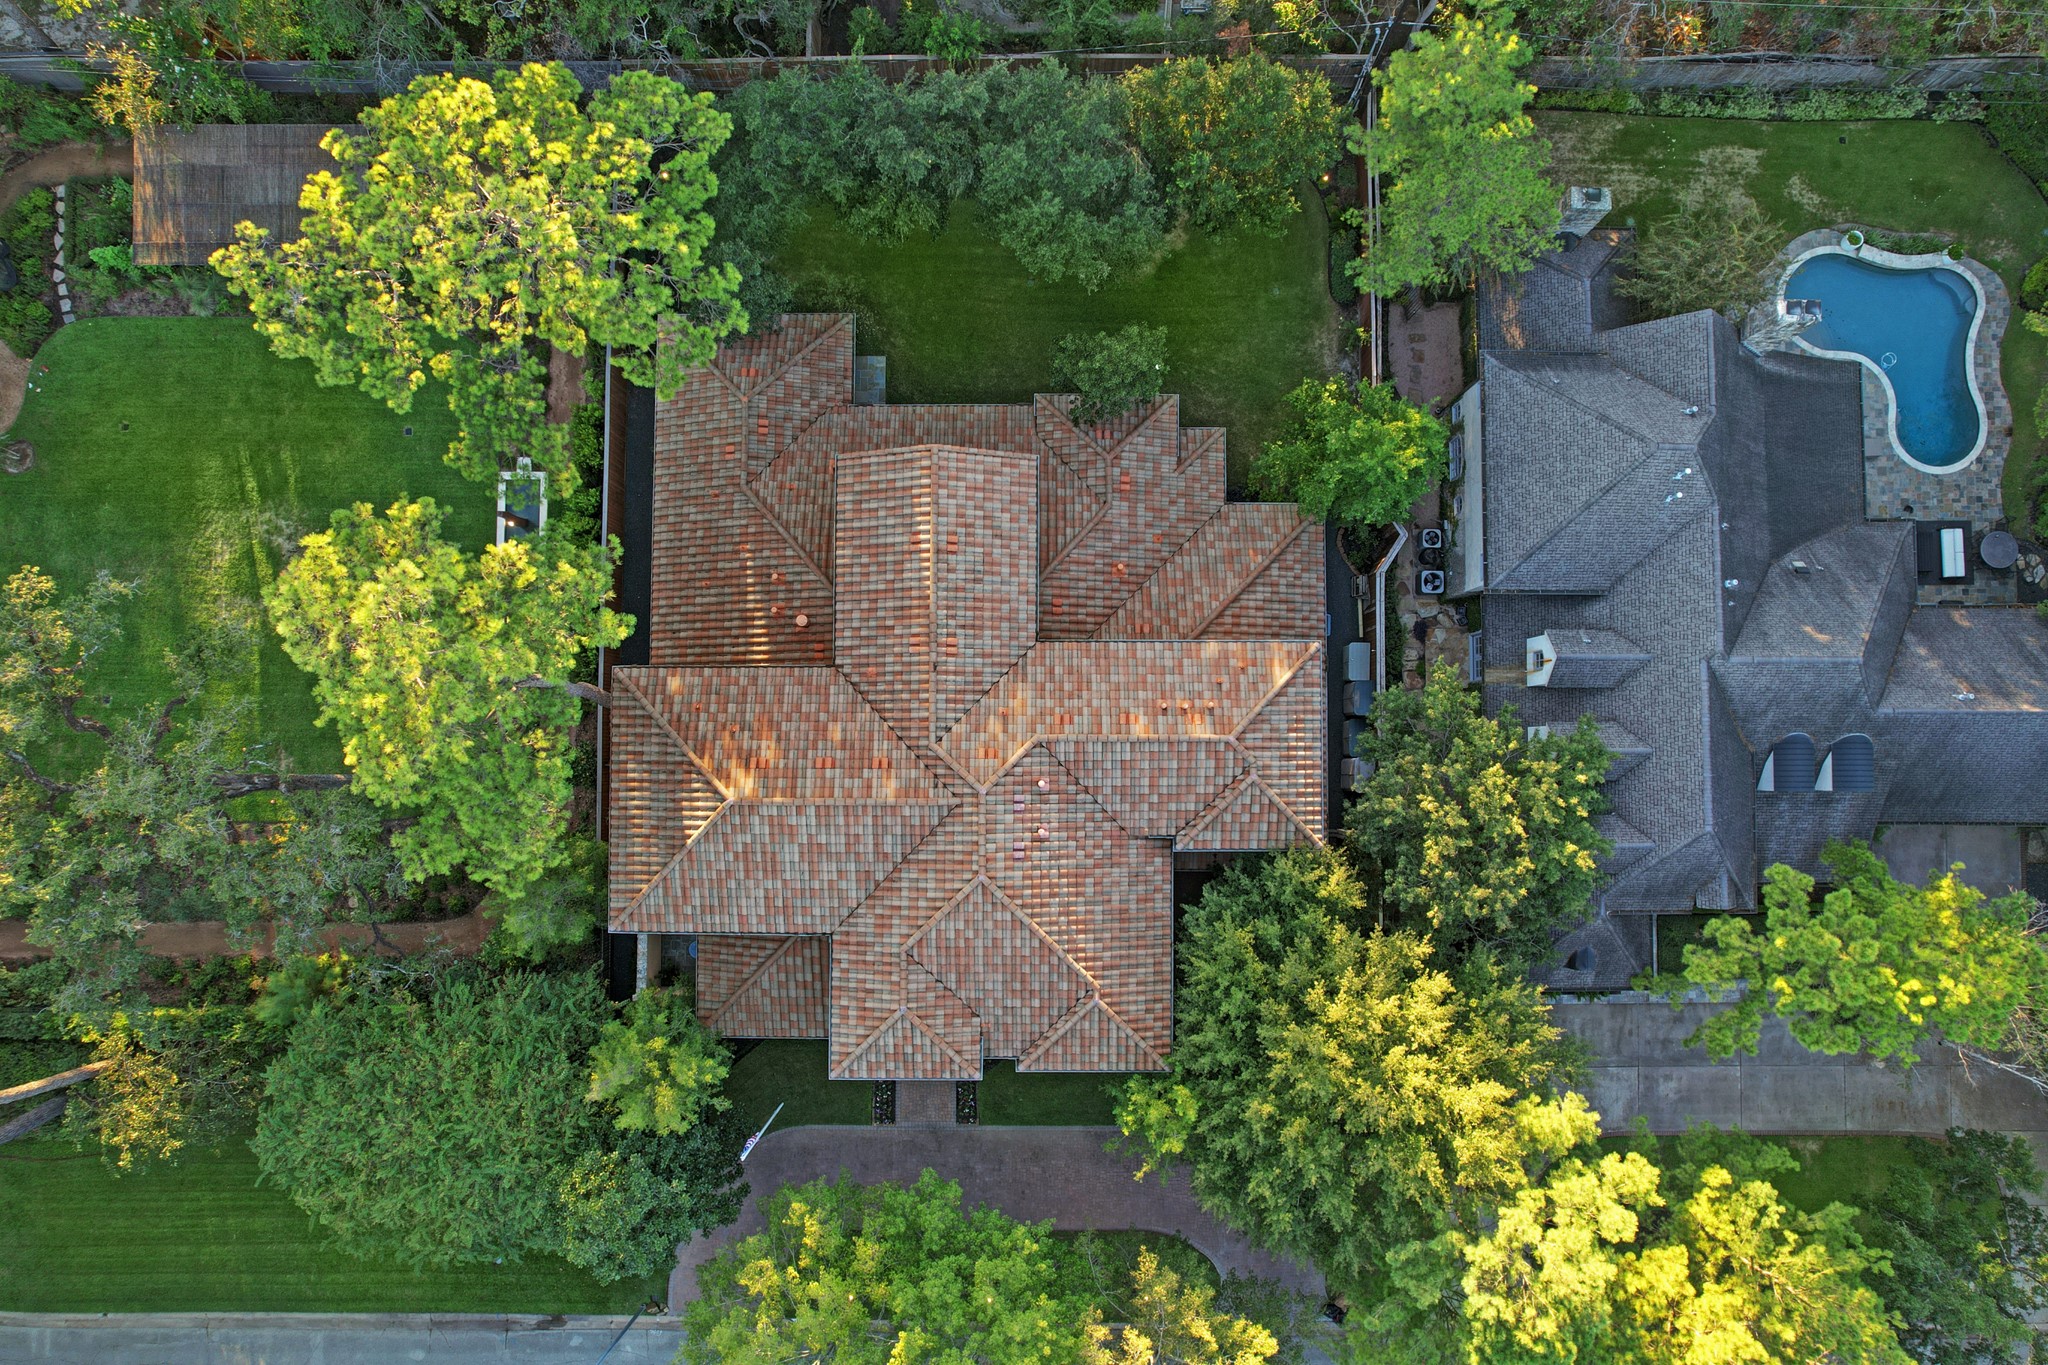 An aerial view showing you the entire property.